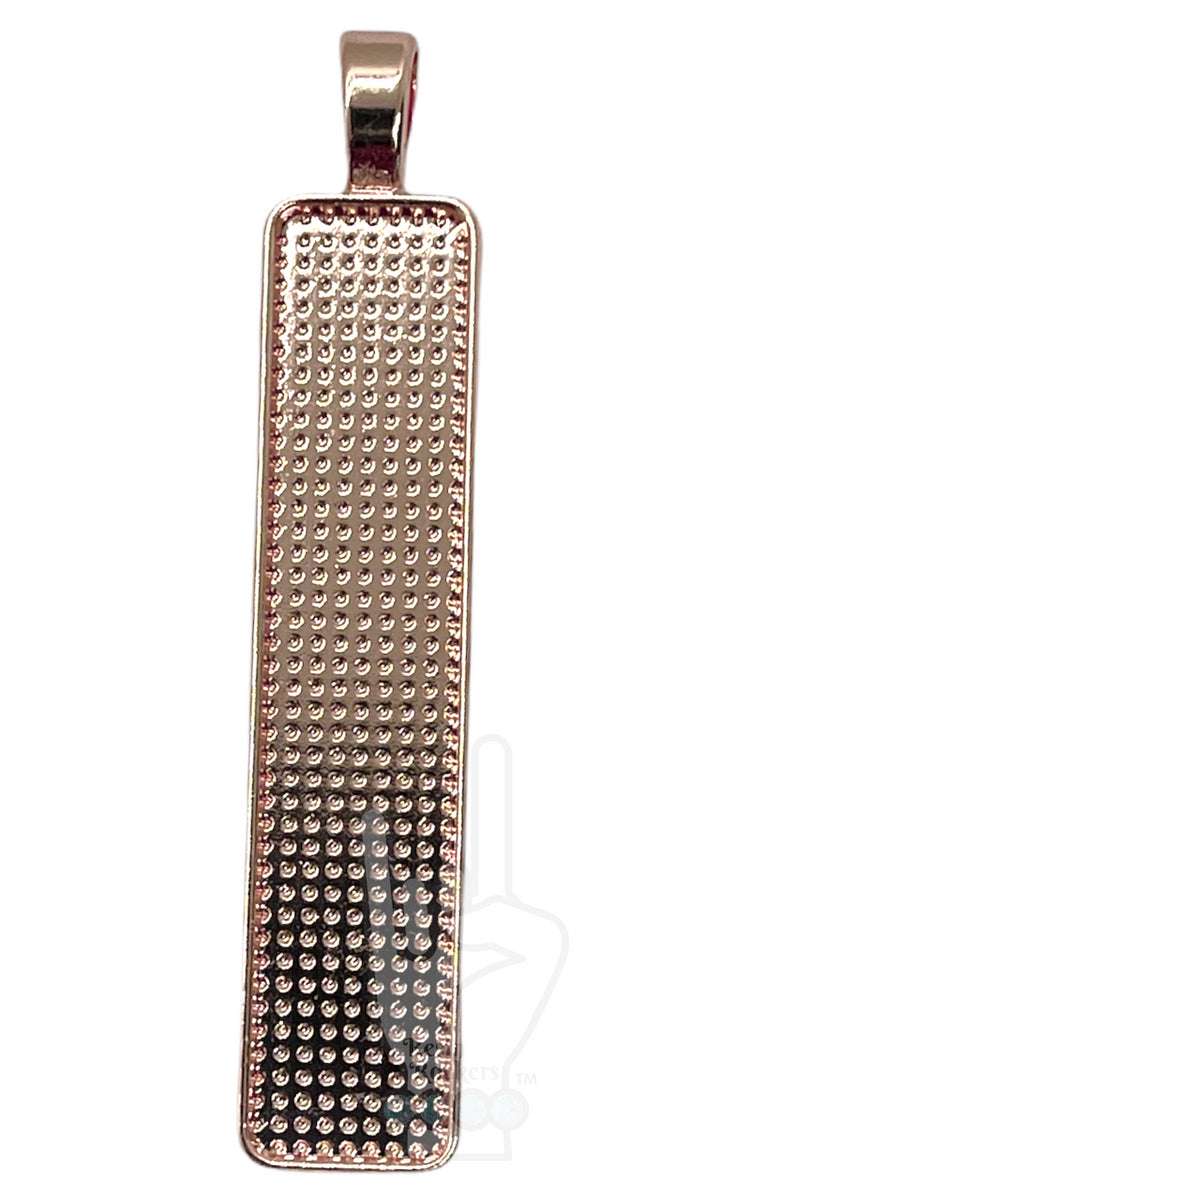 .5 x 2 Inch Stainless Steel Bar Shaped Necklace Bezel Pendant Blank for UV or Epoxy Resin